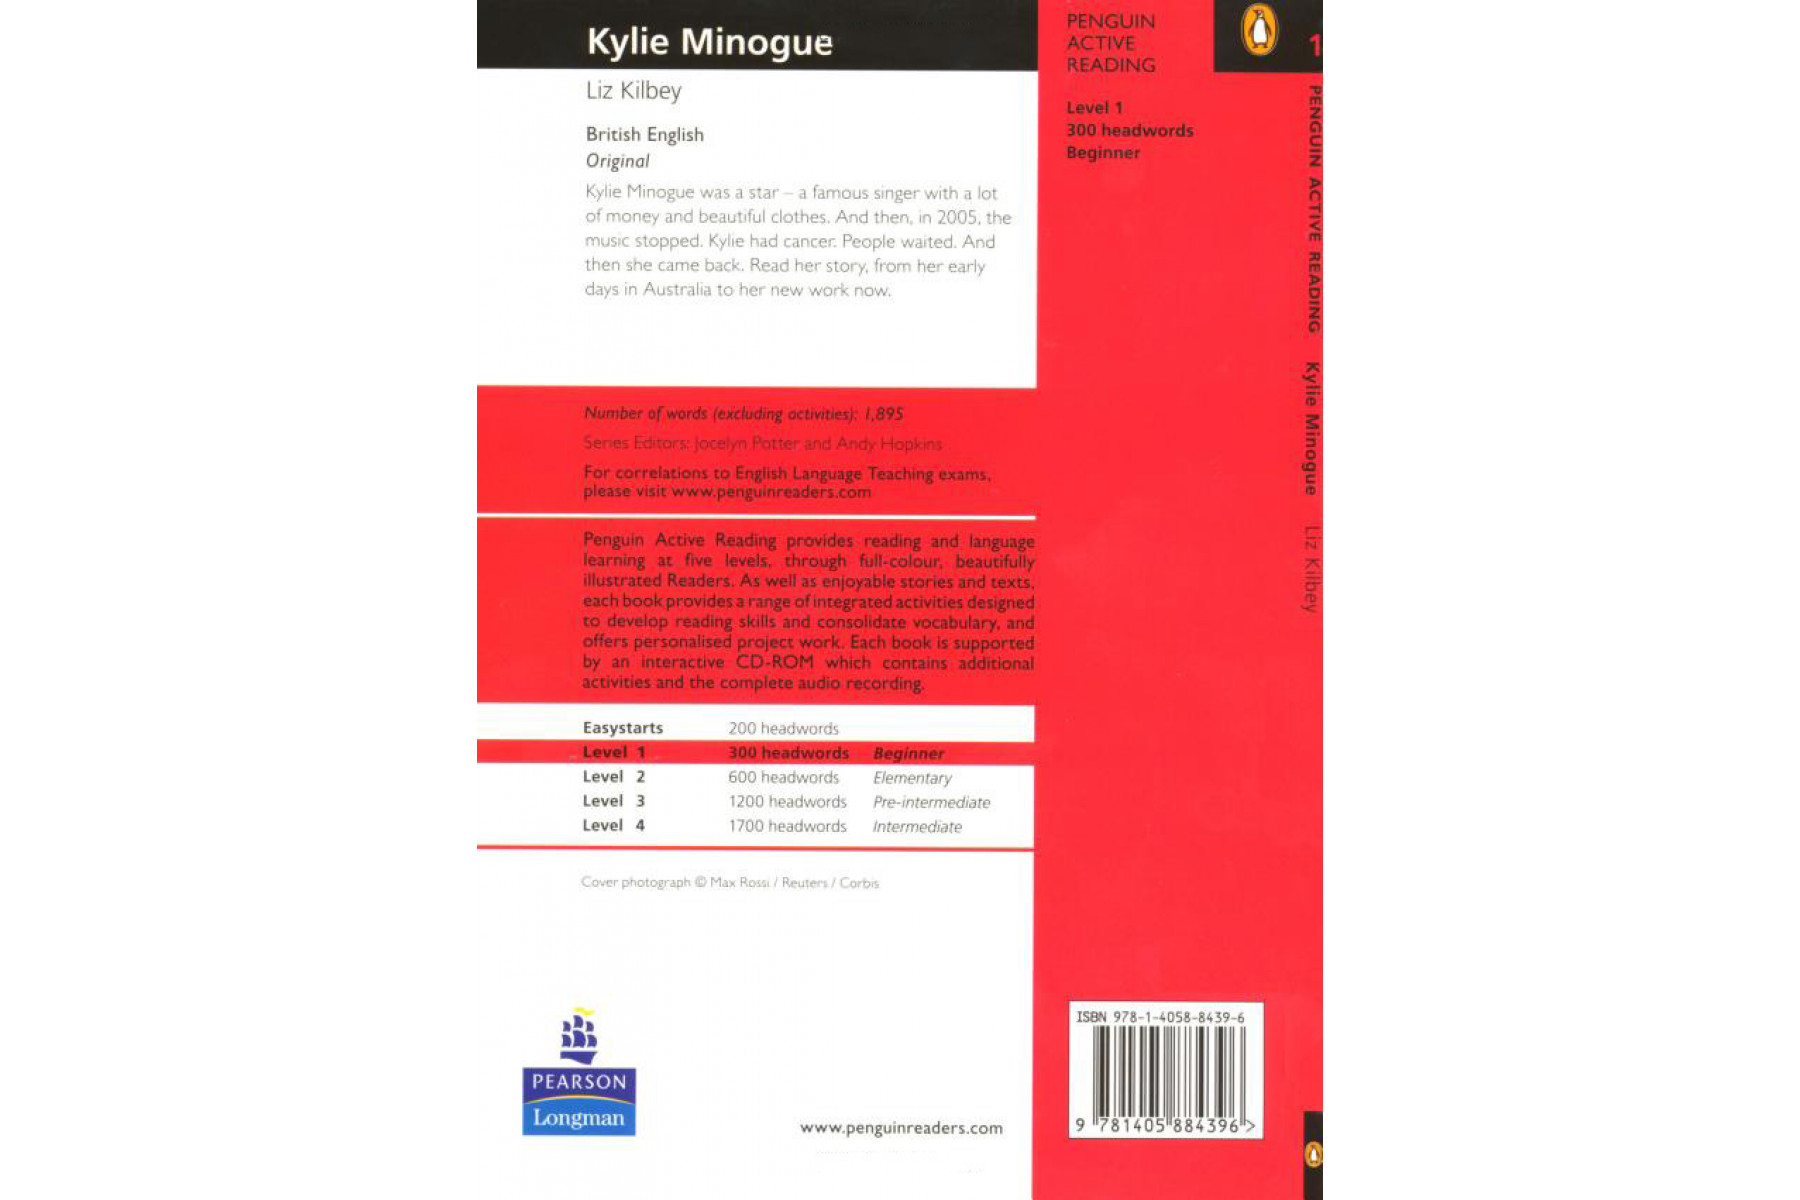 PAR 1: Kylie Minogue Book and CD-ROM Pack